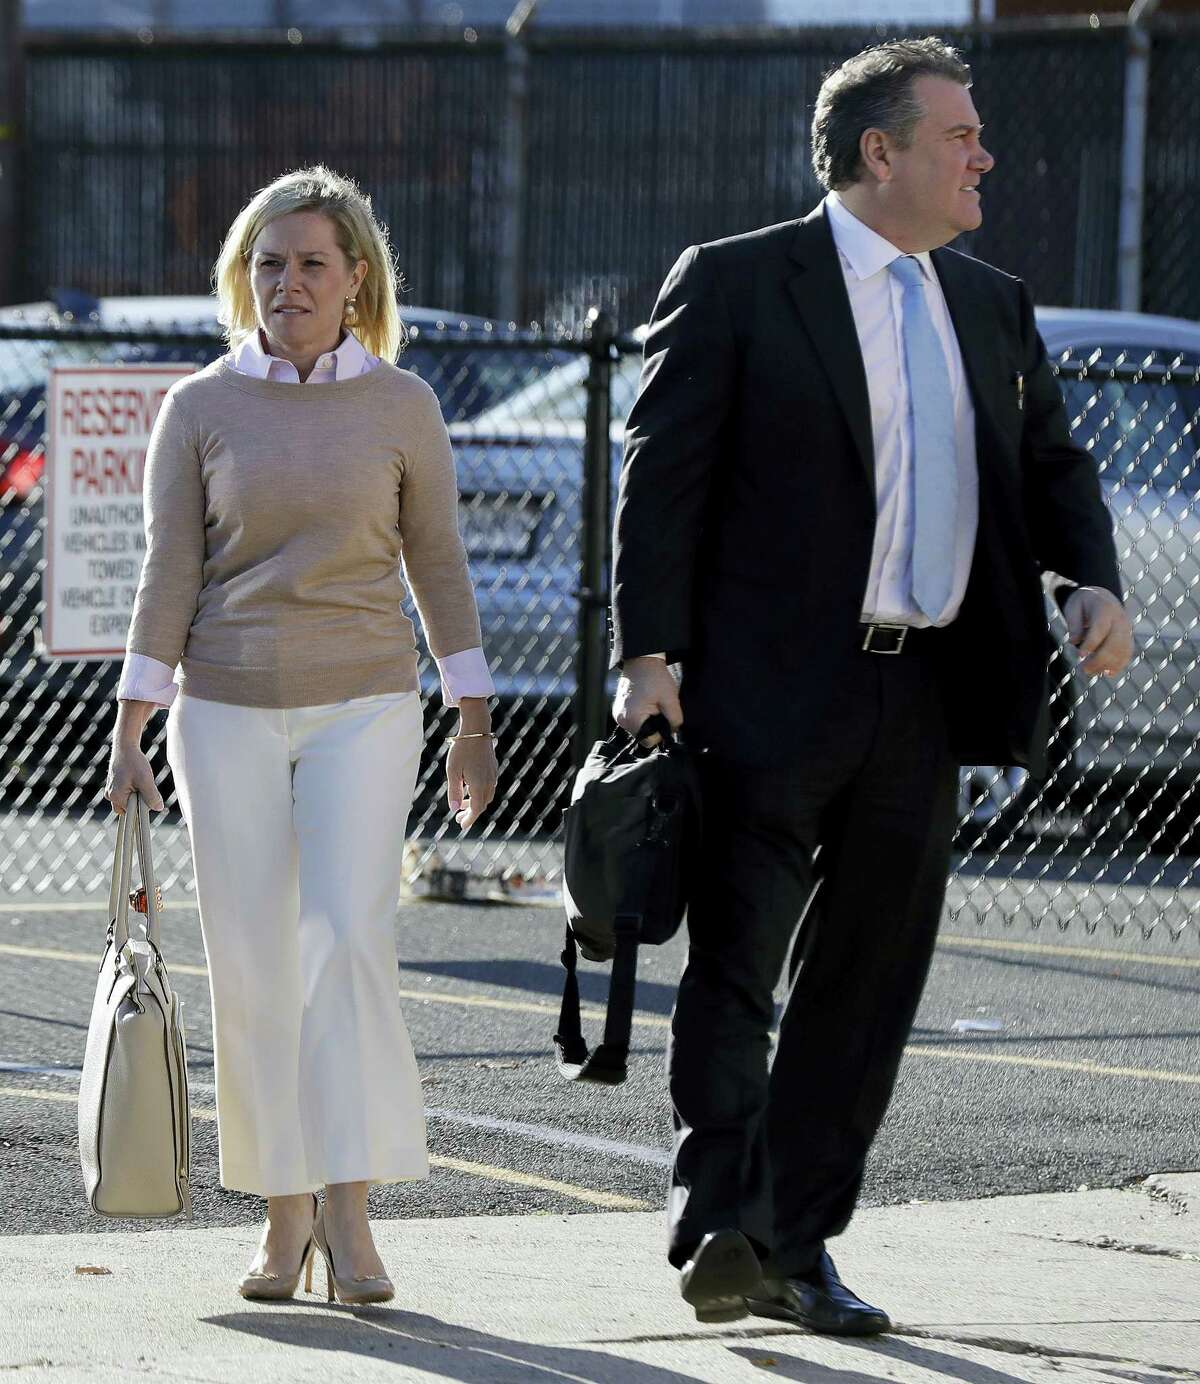 New Jersey Gov. Chris Christie’s former Deputy Chief of Staff Bridget Anne Kelly arrives at Martin Luther King, Jr., Federal Court, Friday, Nov. 4, 2016, in Newark, N.J. Kelly and Bill Baroni are charged with scheming to use traffic jams to punish a Democratic mayor who didn’t endorse Christie in 2013.